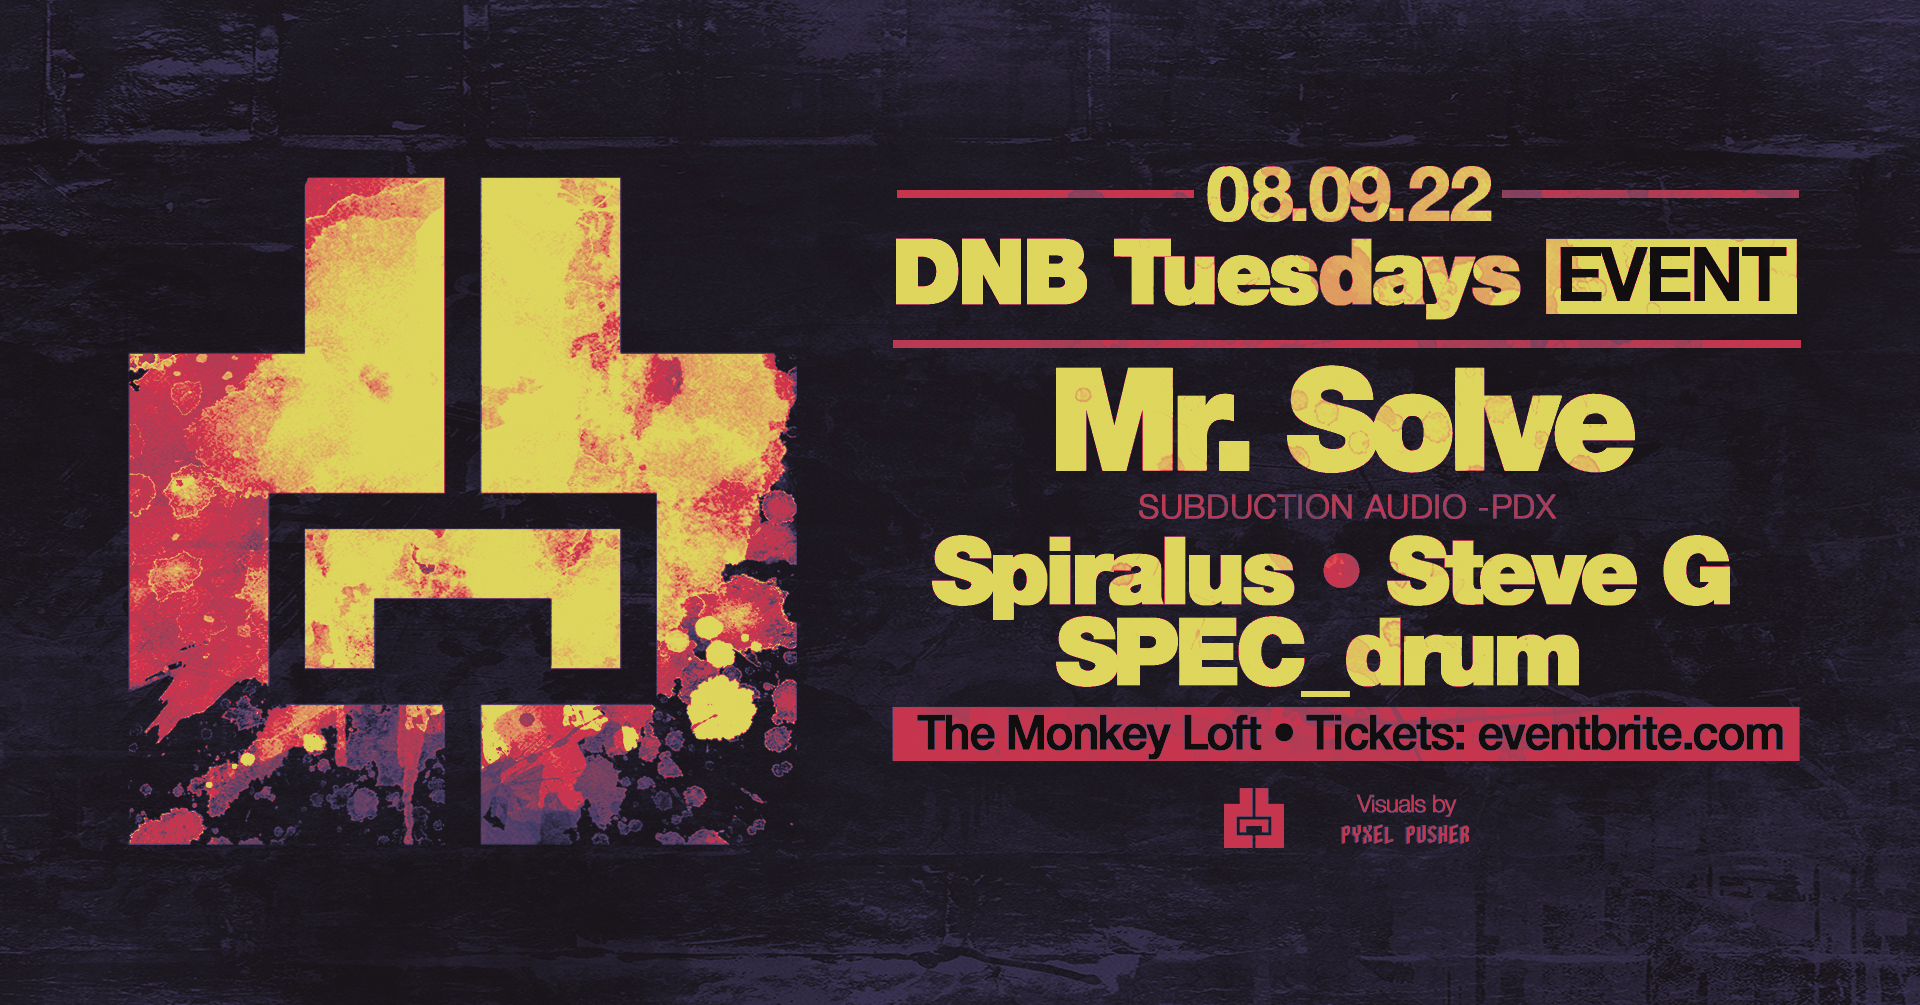 Mr. Solve at dnb tuesdays august 9th